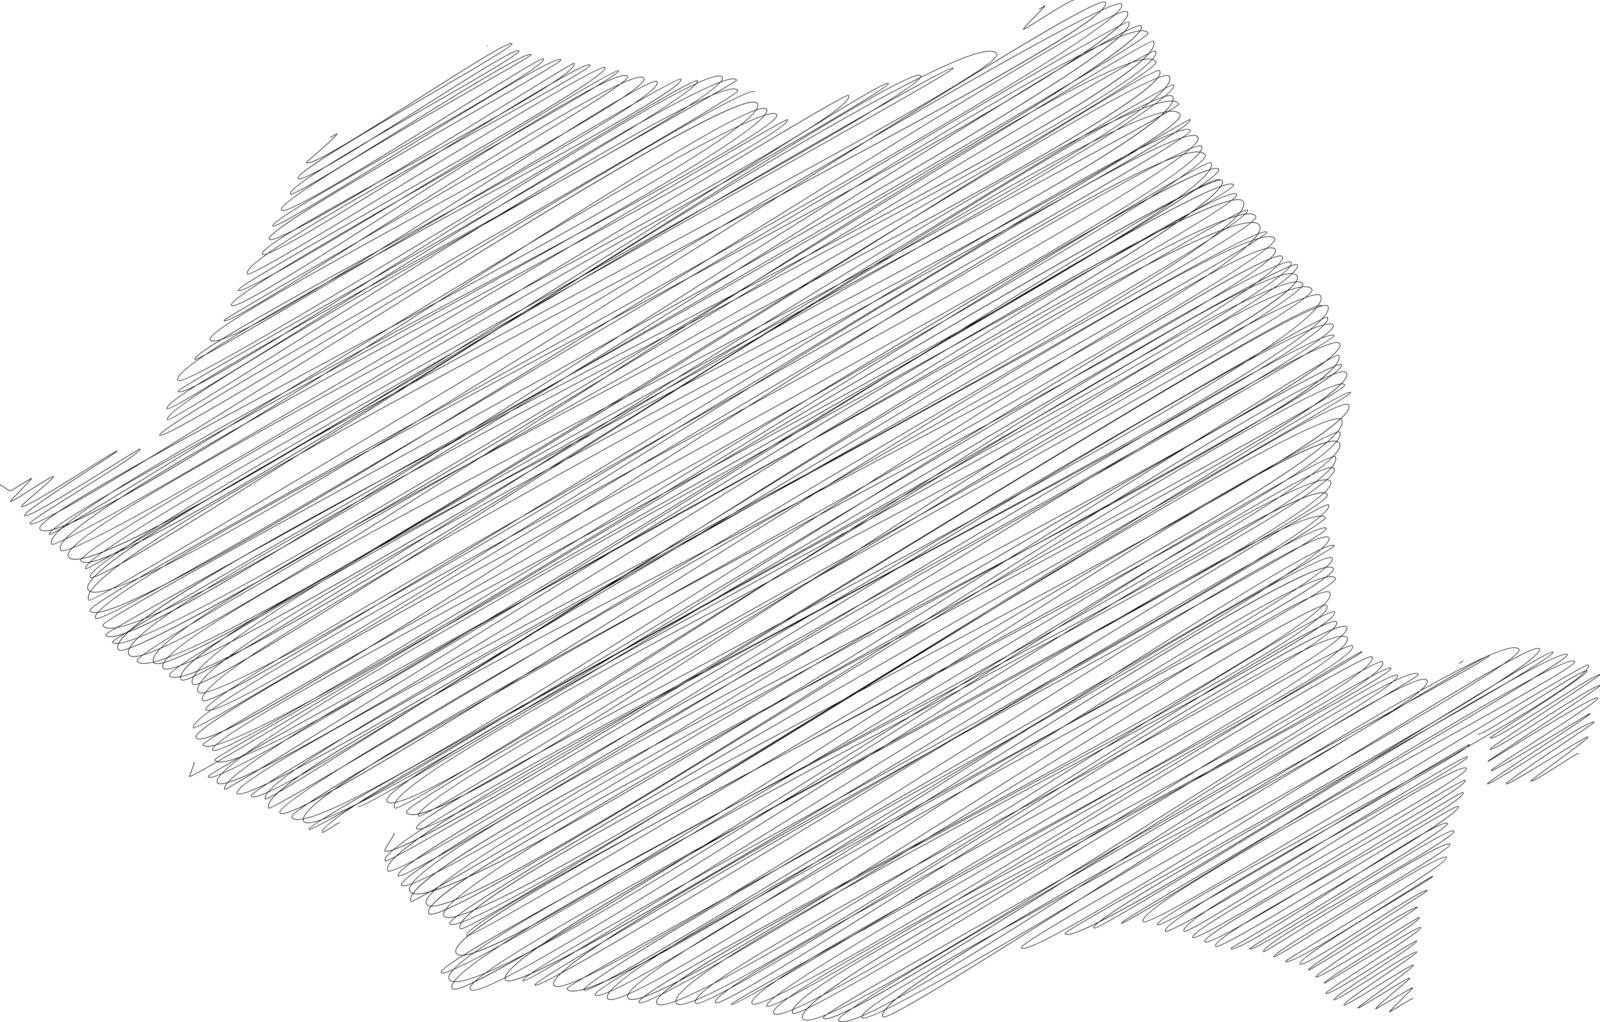 Romania - pencil scribble sketch silhouette map of country area with dropped shadow. Simple flat vector illustration.